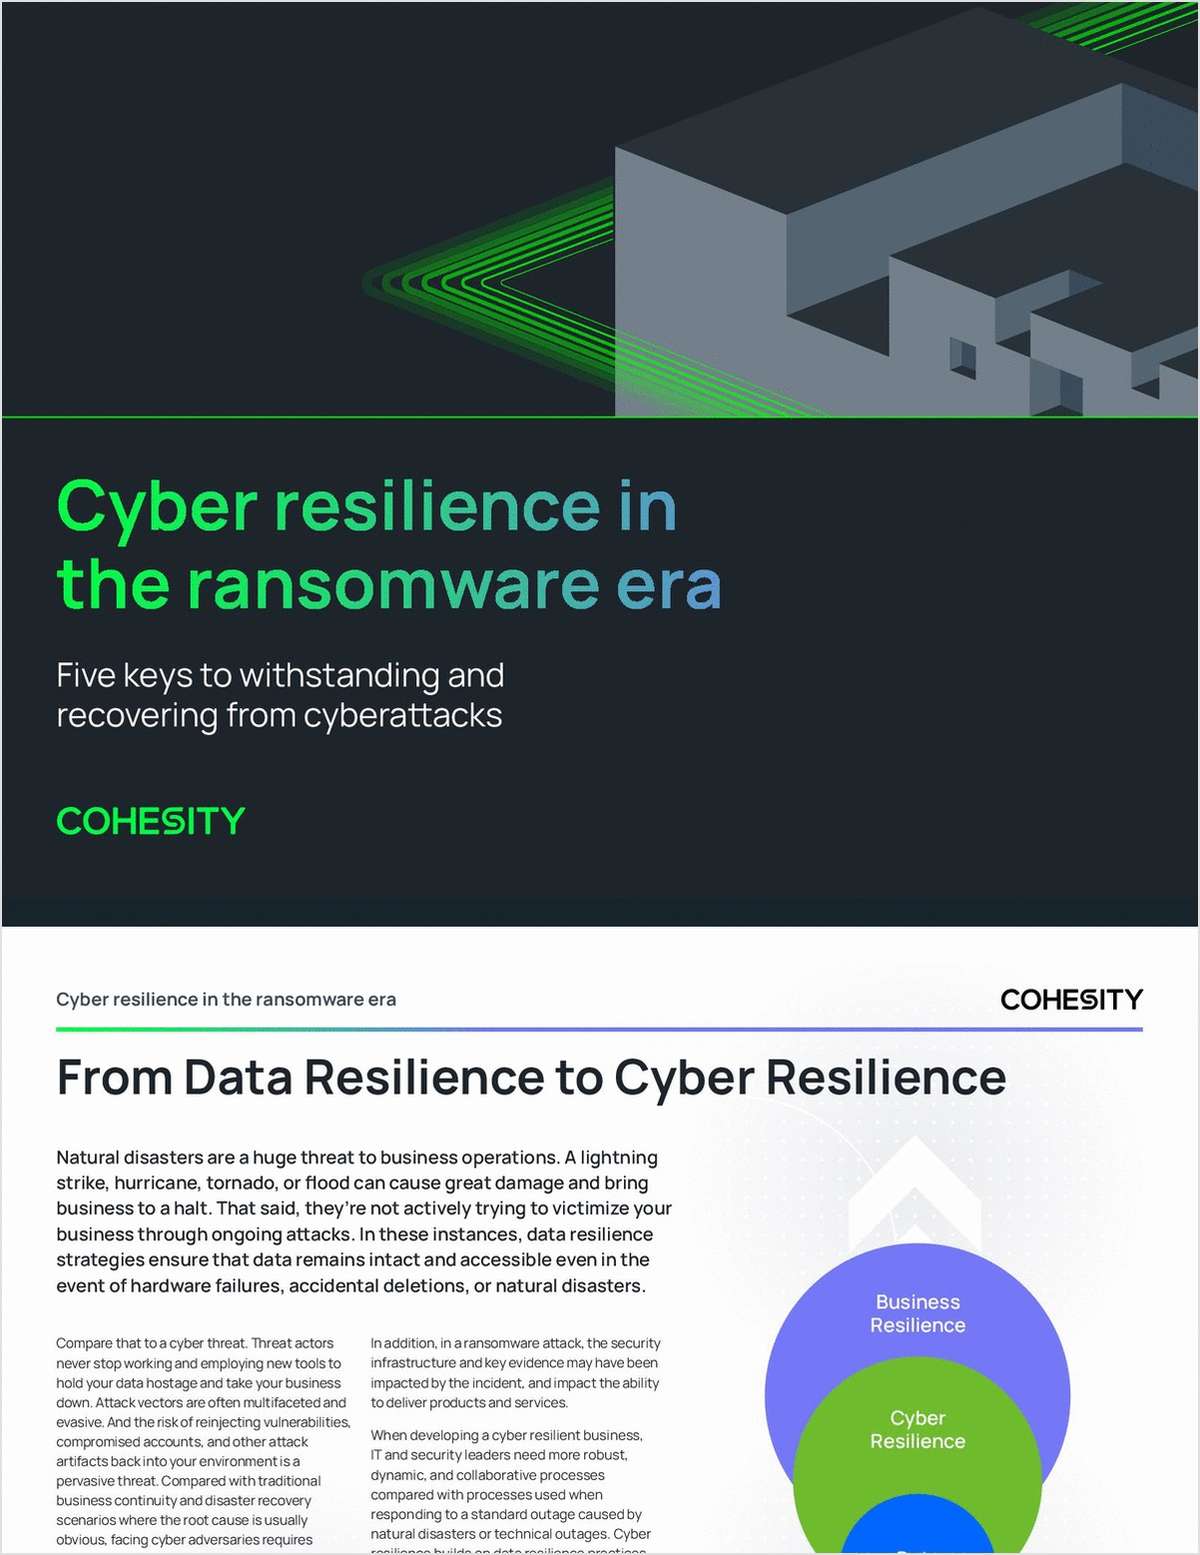 Cyber resilience in the ransomware era